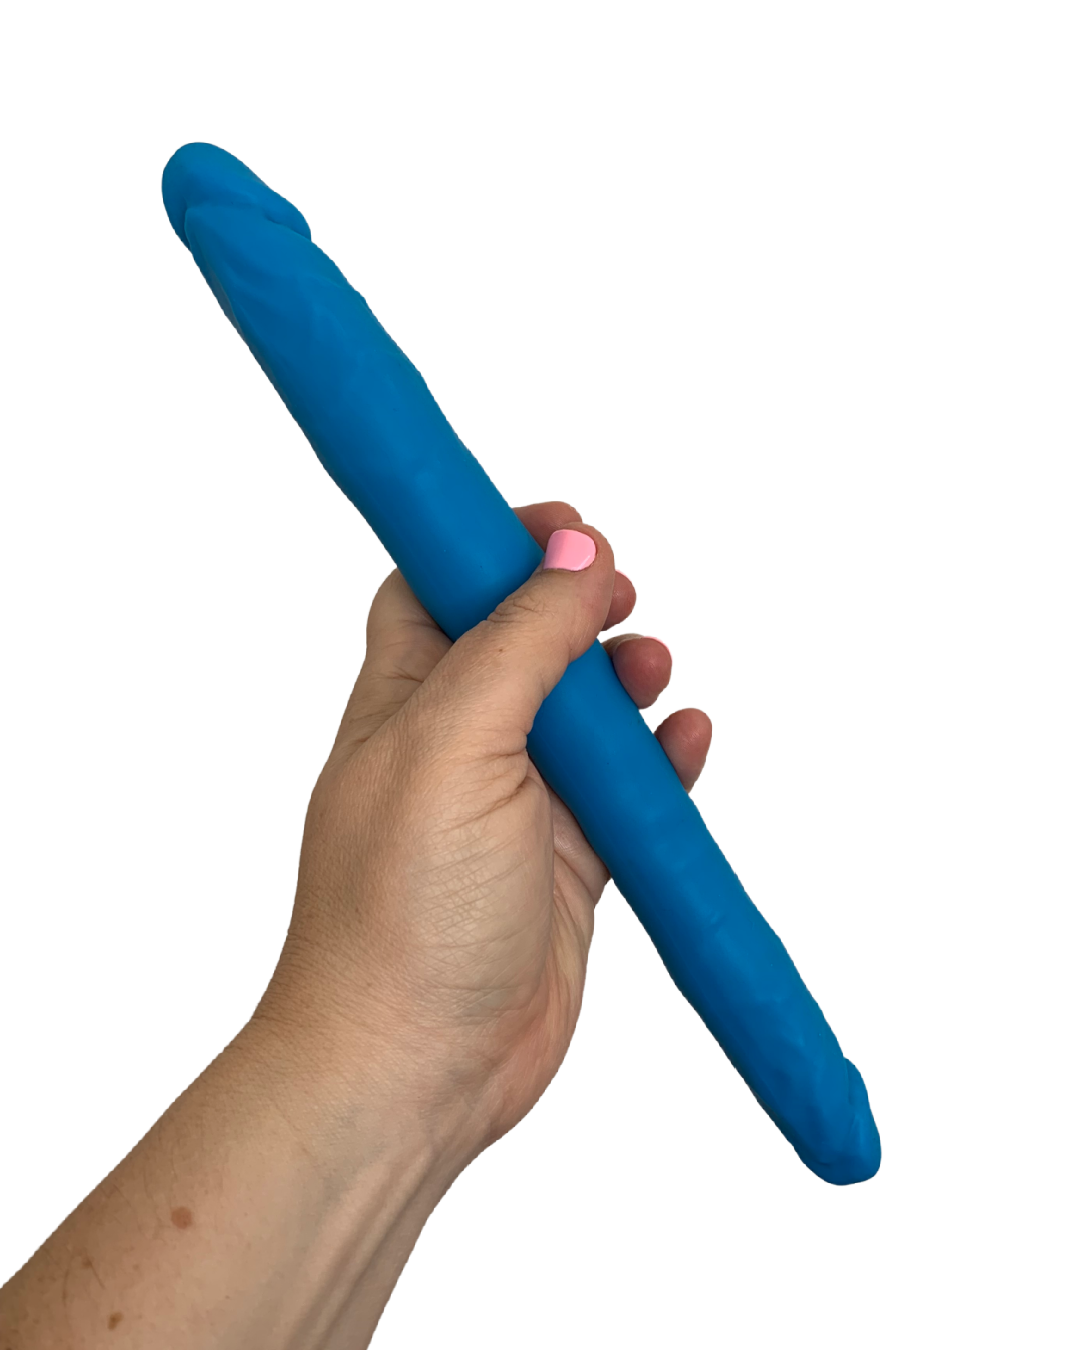 Colours 12 Inch Double Ended Dildo - Blue held in a hand